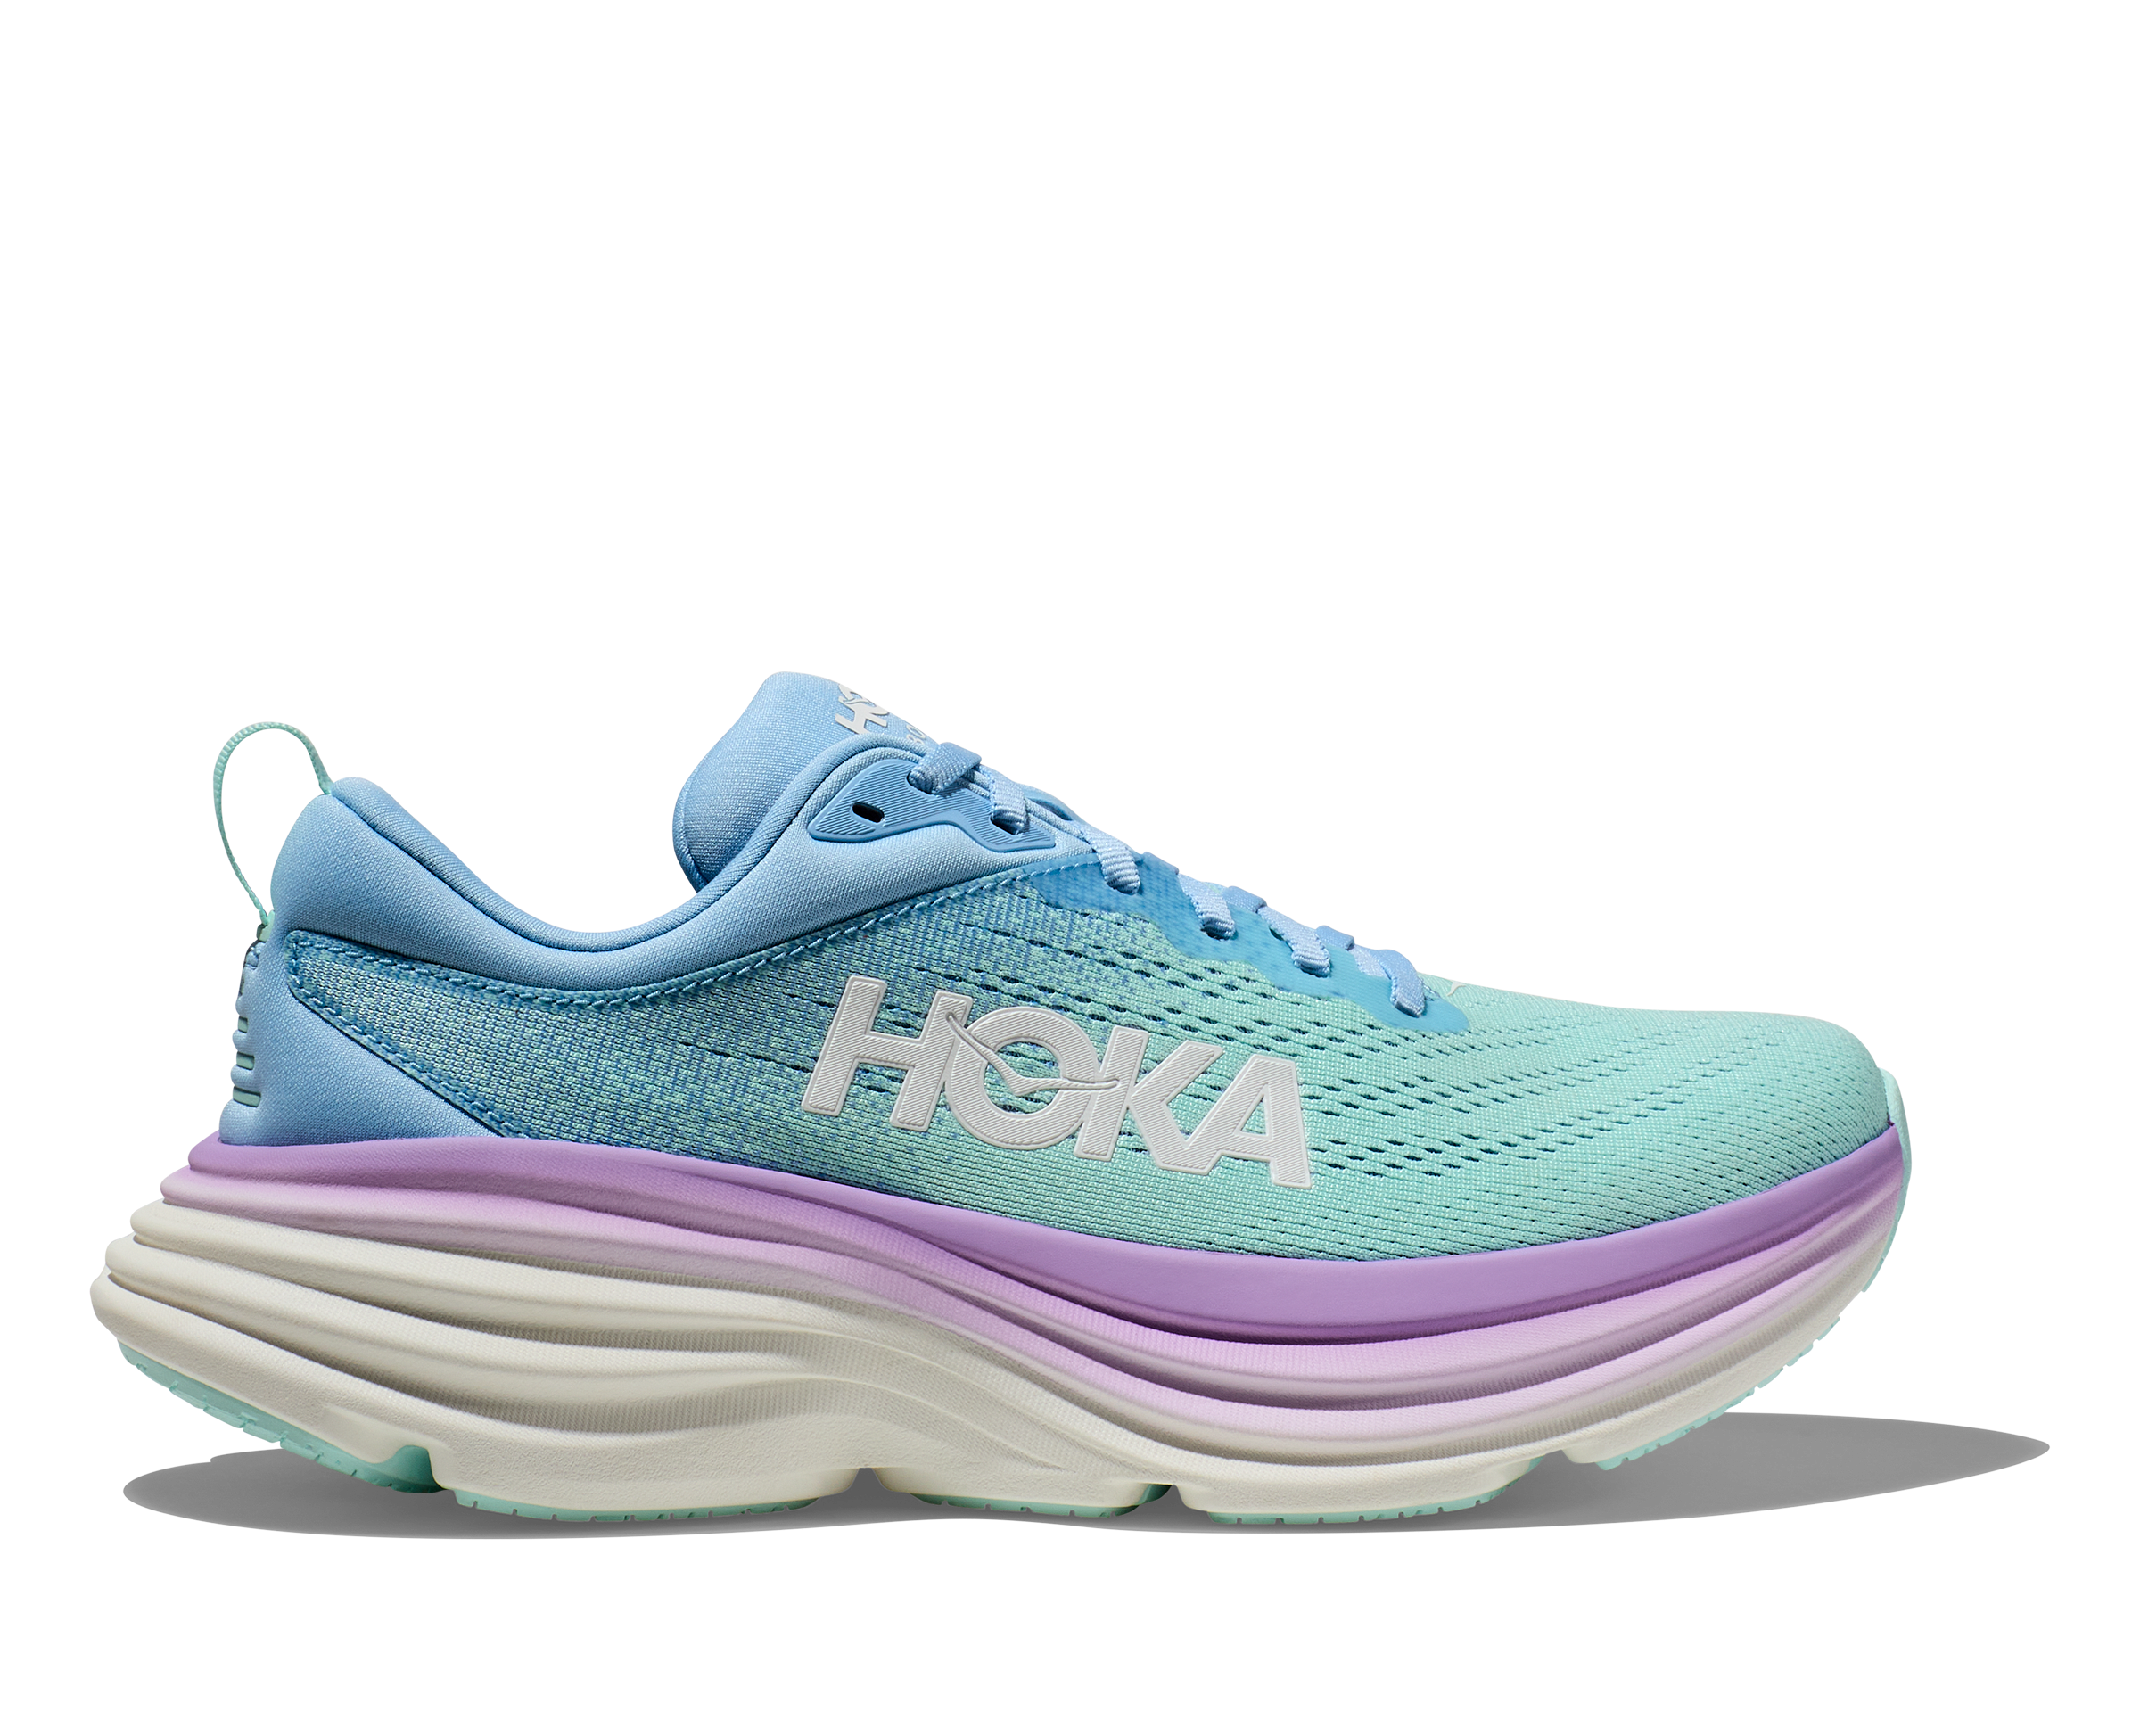 Lateral view of the Women's Bondi 8 by HOKA in the color Airy Blue/Sunlit Ocean